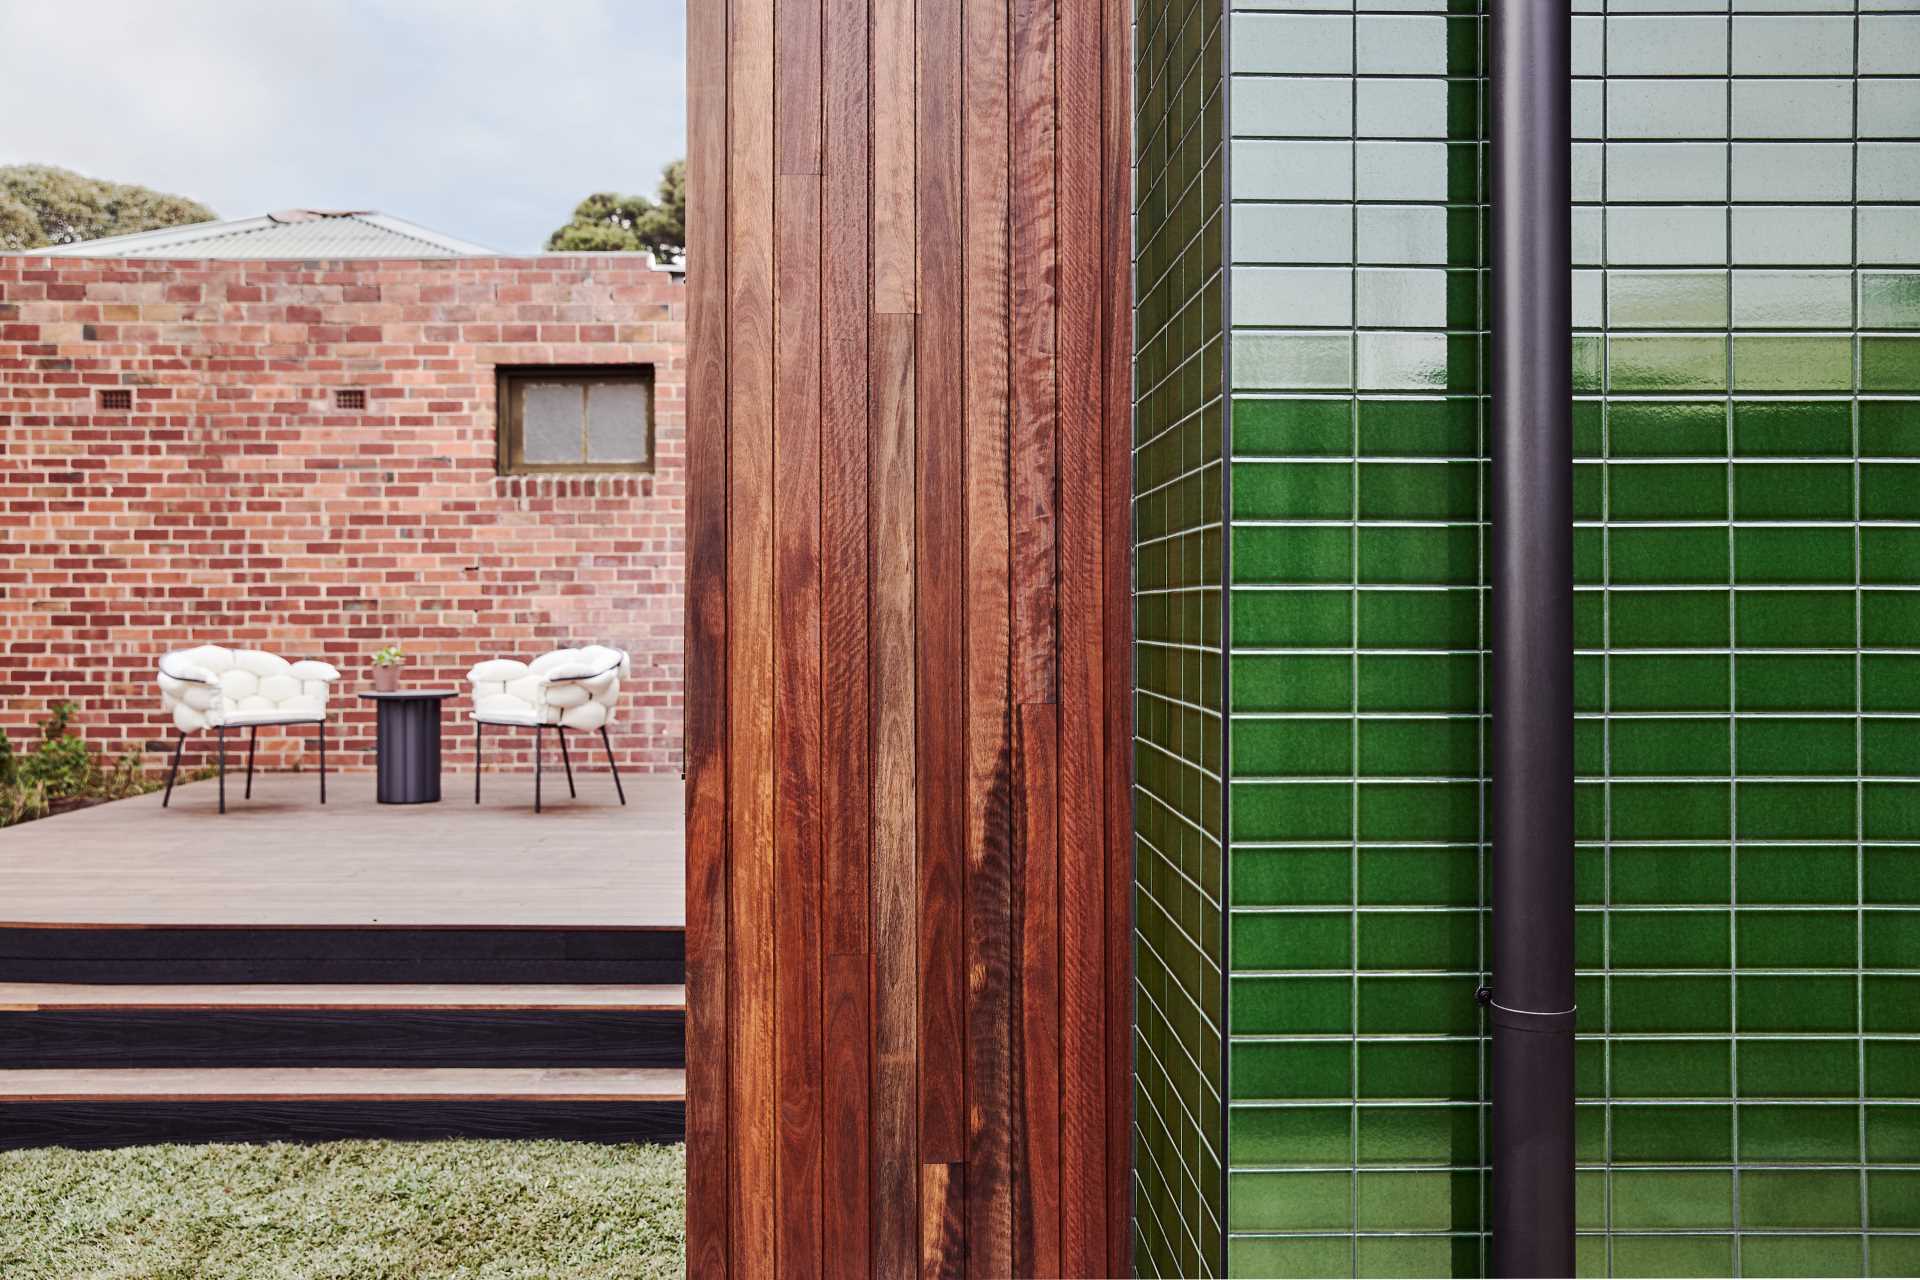 A modern home addition with glazed green tiles.